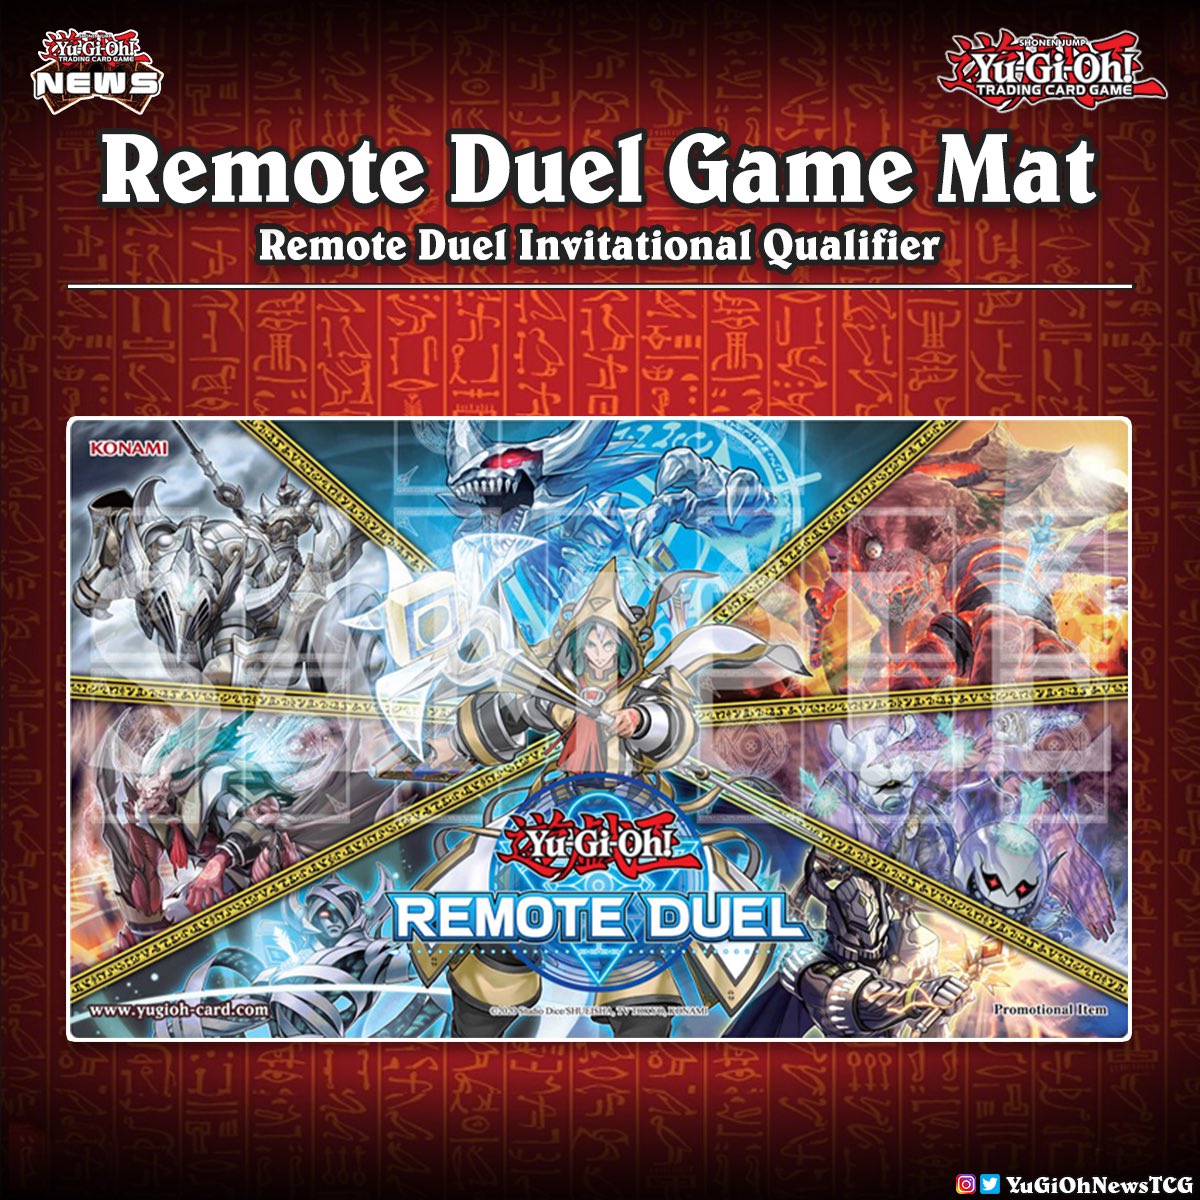 ❰𝗥𝗲𝗺𝗼𝘁𝗲 𝗗𝘂𝗲𝗹 𝗚𝗮𝗺𝗲 𝗠𝗮𝘁❱Duelists, the Remote Duel Invitational Qualifier is this ...